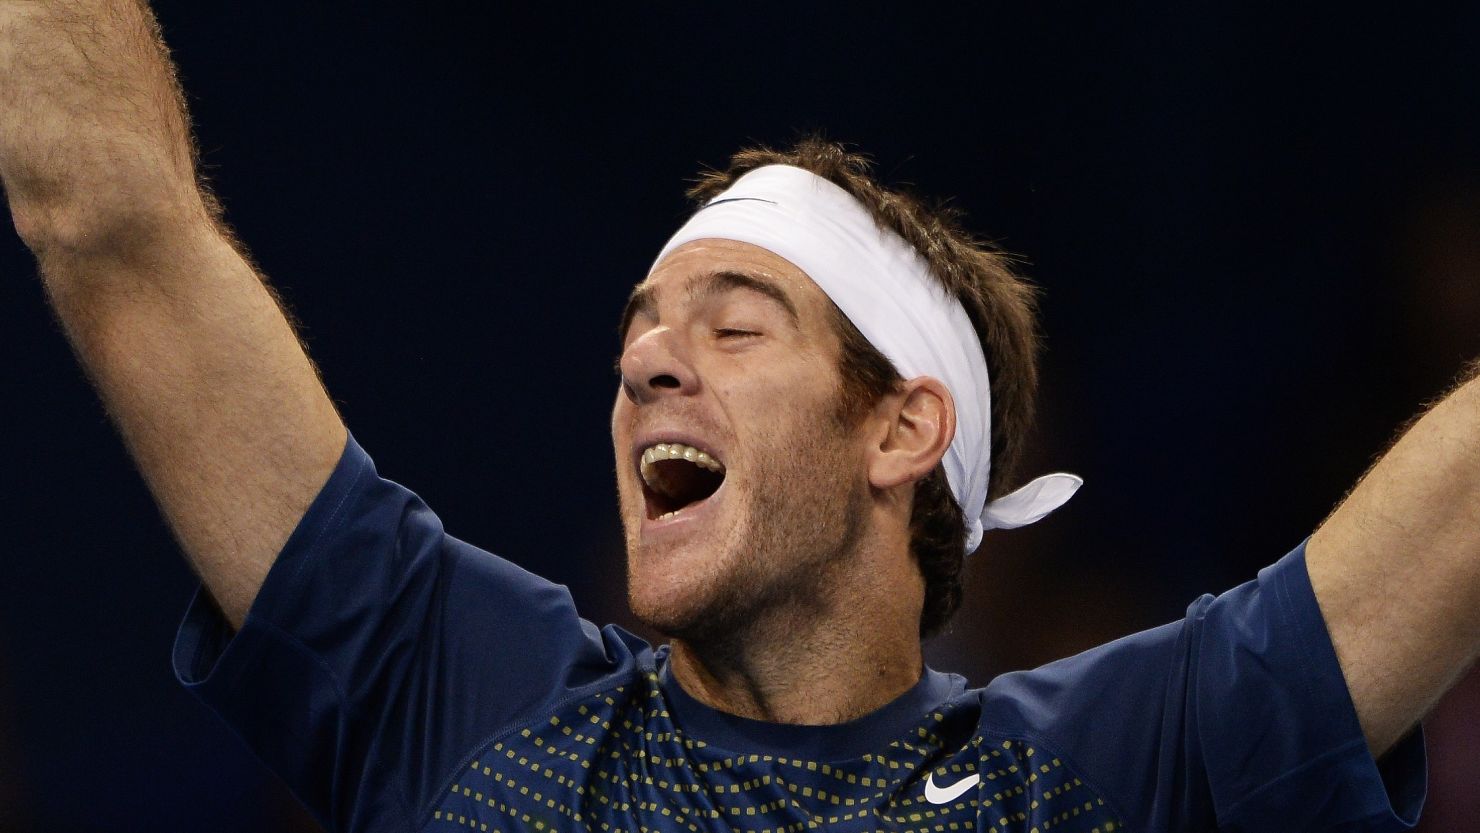 Juan Martin Del Potro shows how much victory over Roger Federer means to him as he takes the Basel title.